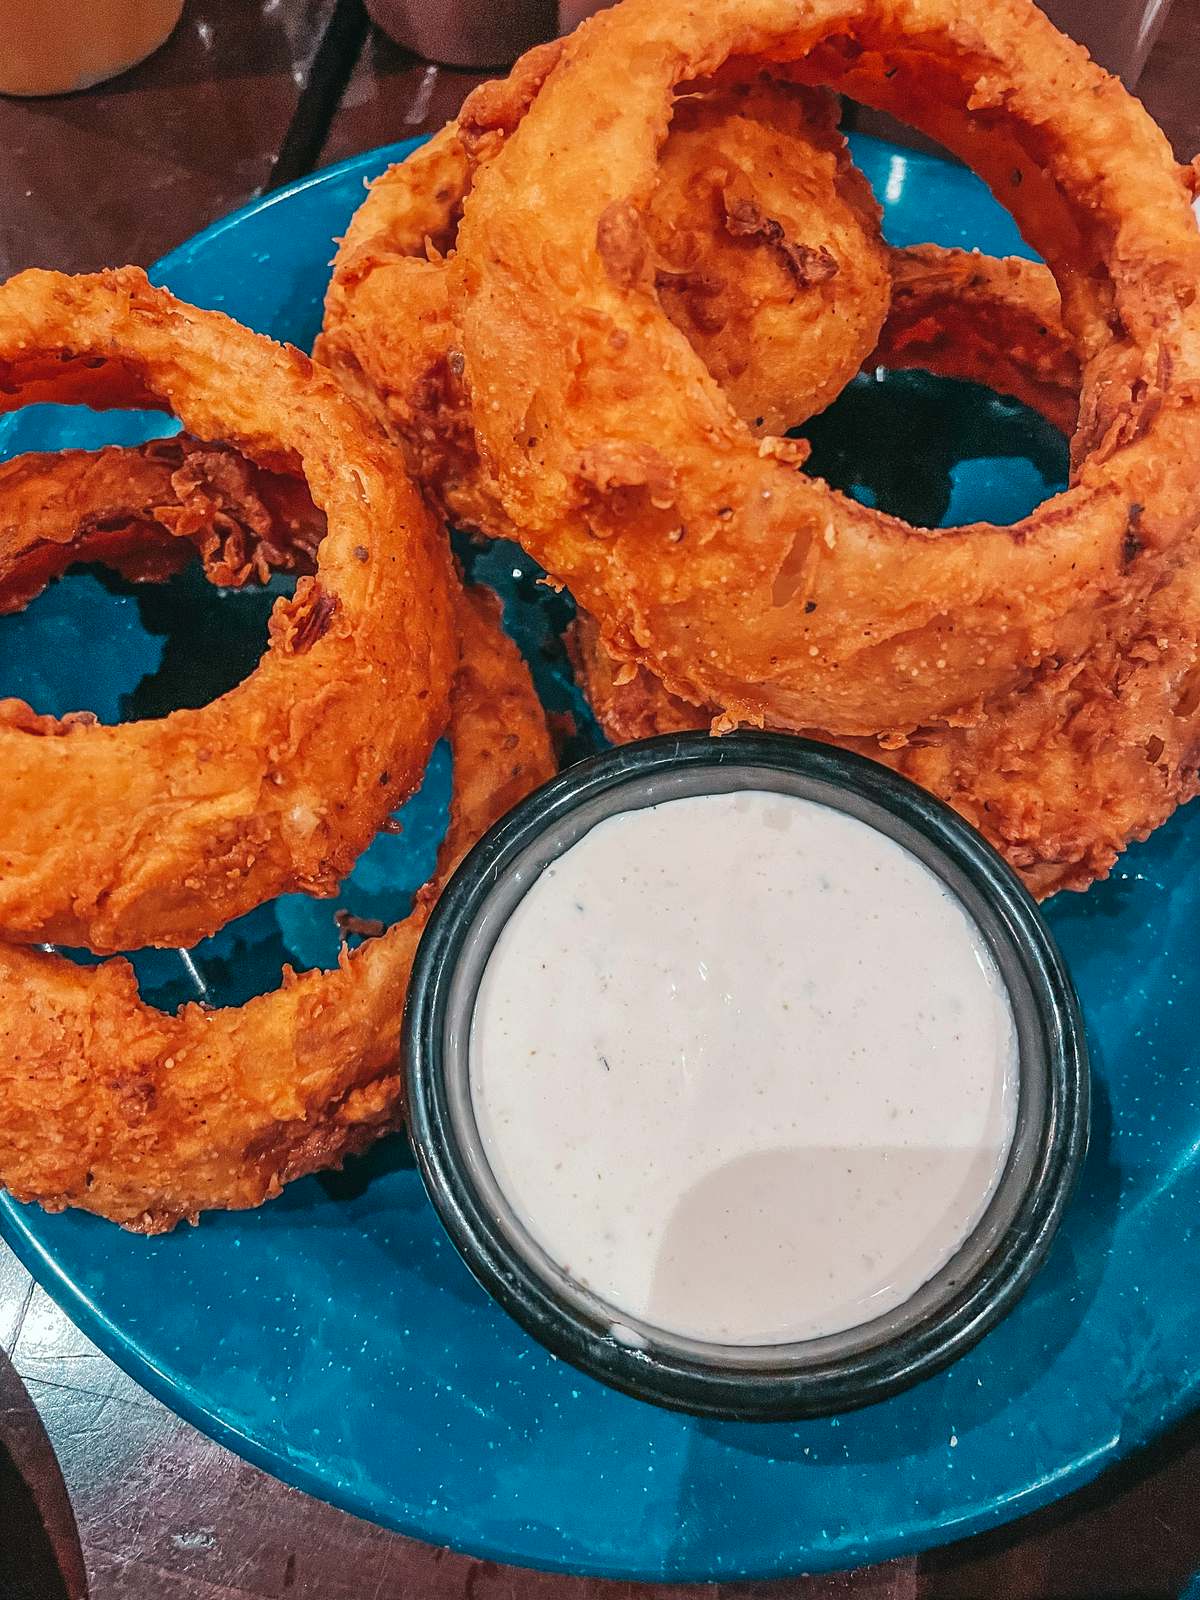 Giant onion rings from Mojo Federal